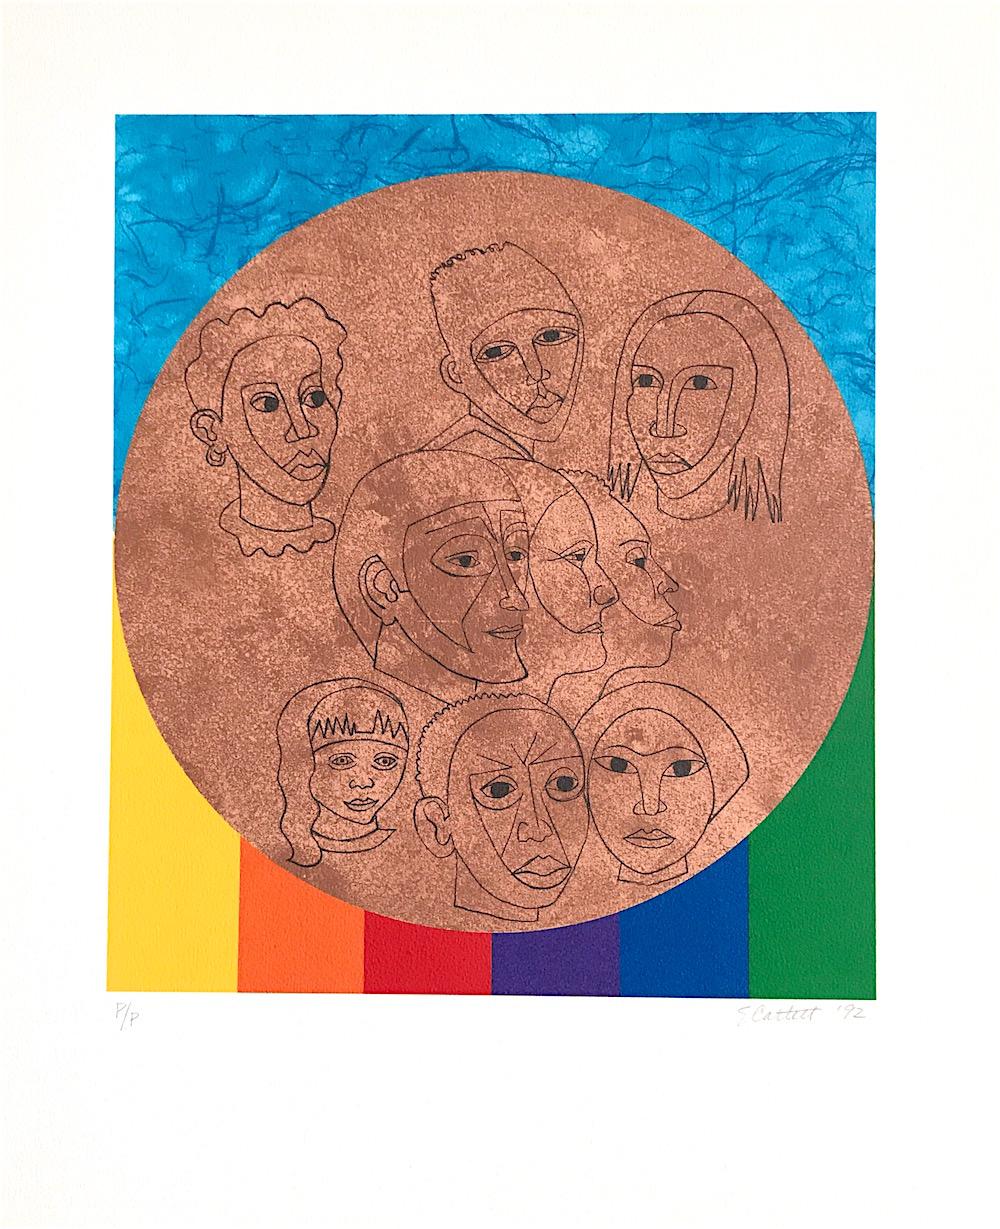 Elizabeth Catlett Abstract Print - ALL THE PEOPLE Signed Lithograph, For My People-Margaret Walker, Rainbow Faces